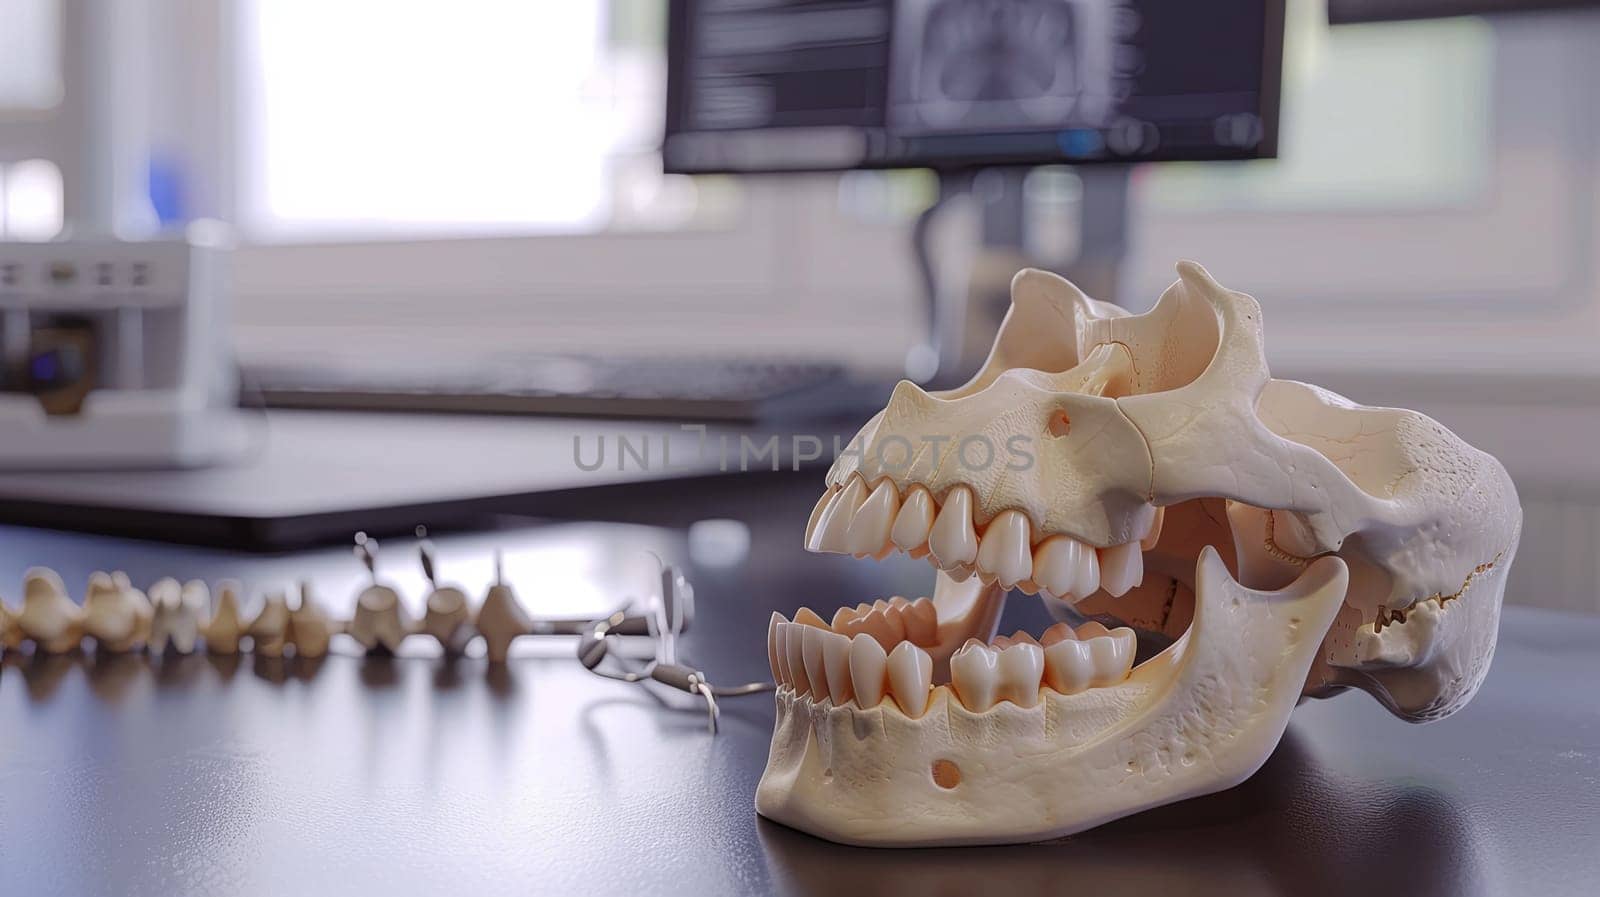 A precise 3D model of a human skull displaying detailed teeth structure. Ideal for educational purposes in dental schools and medical conferences.